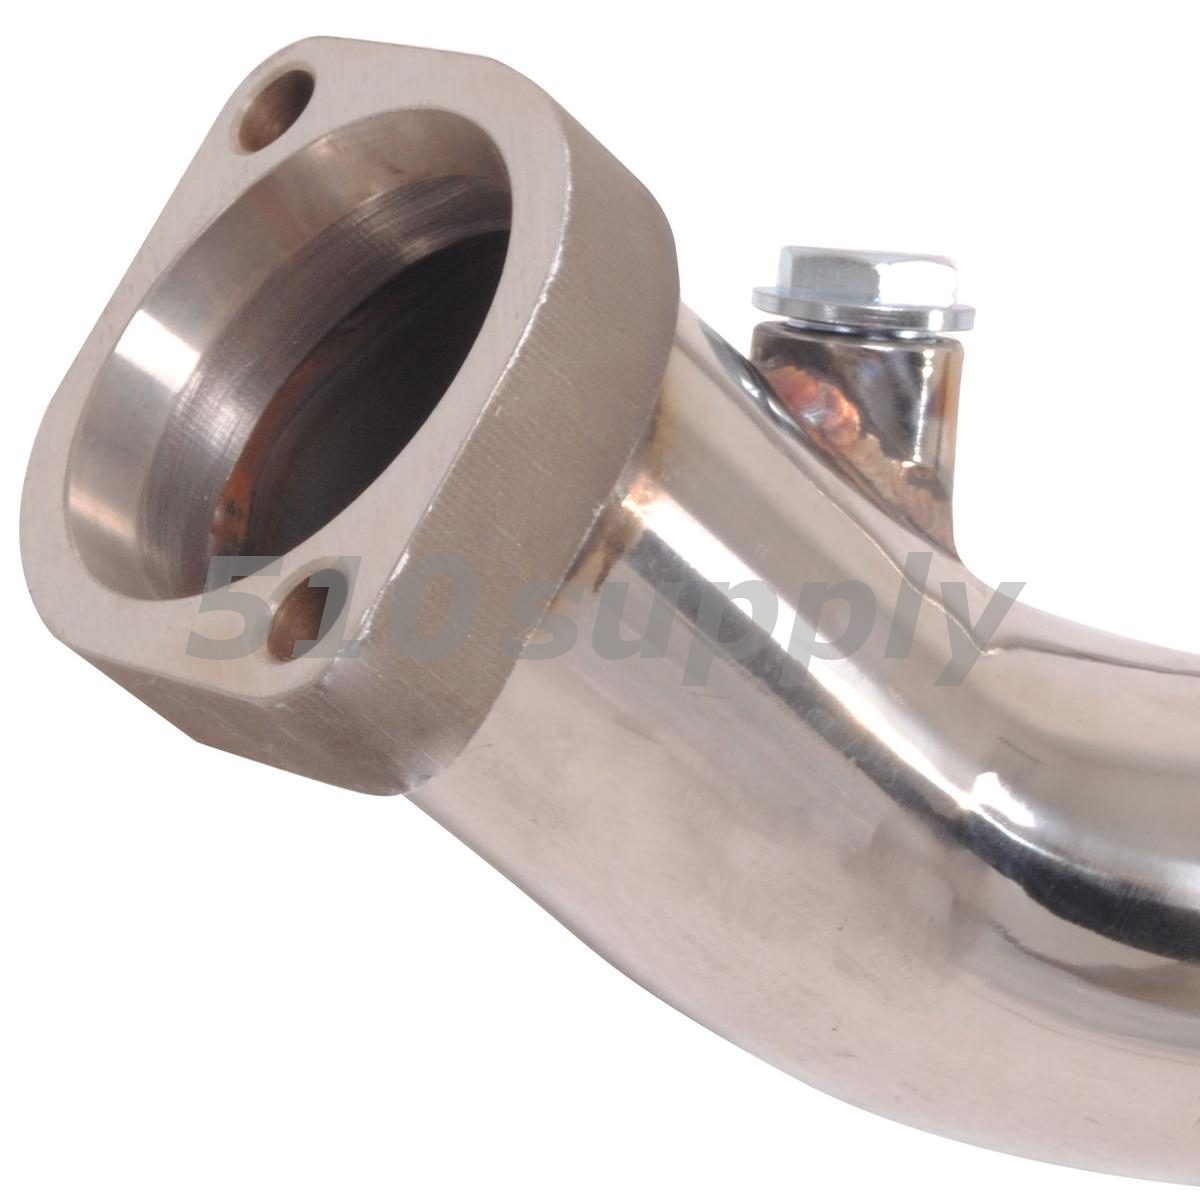  central pipe BMW 3 series M3 E90 E92 E93 front pipe V8 4.0L made of stainless steel TOYOSPORTS